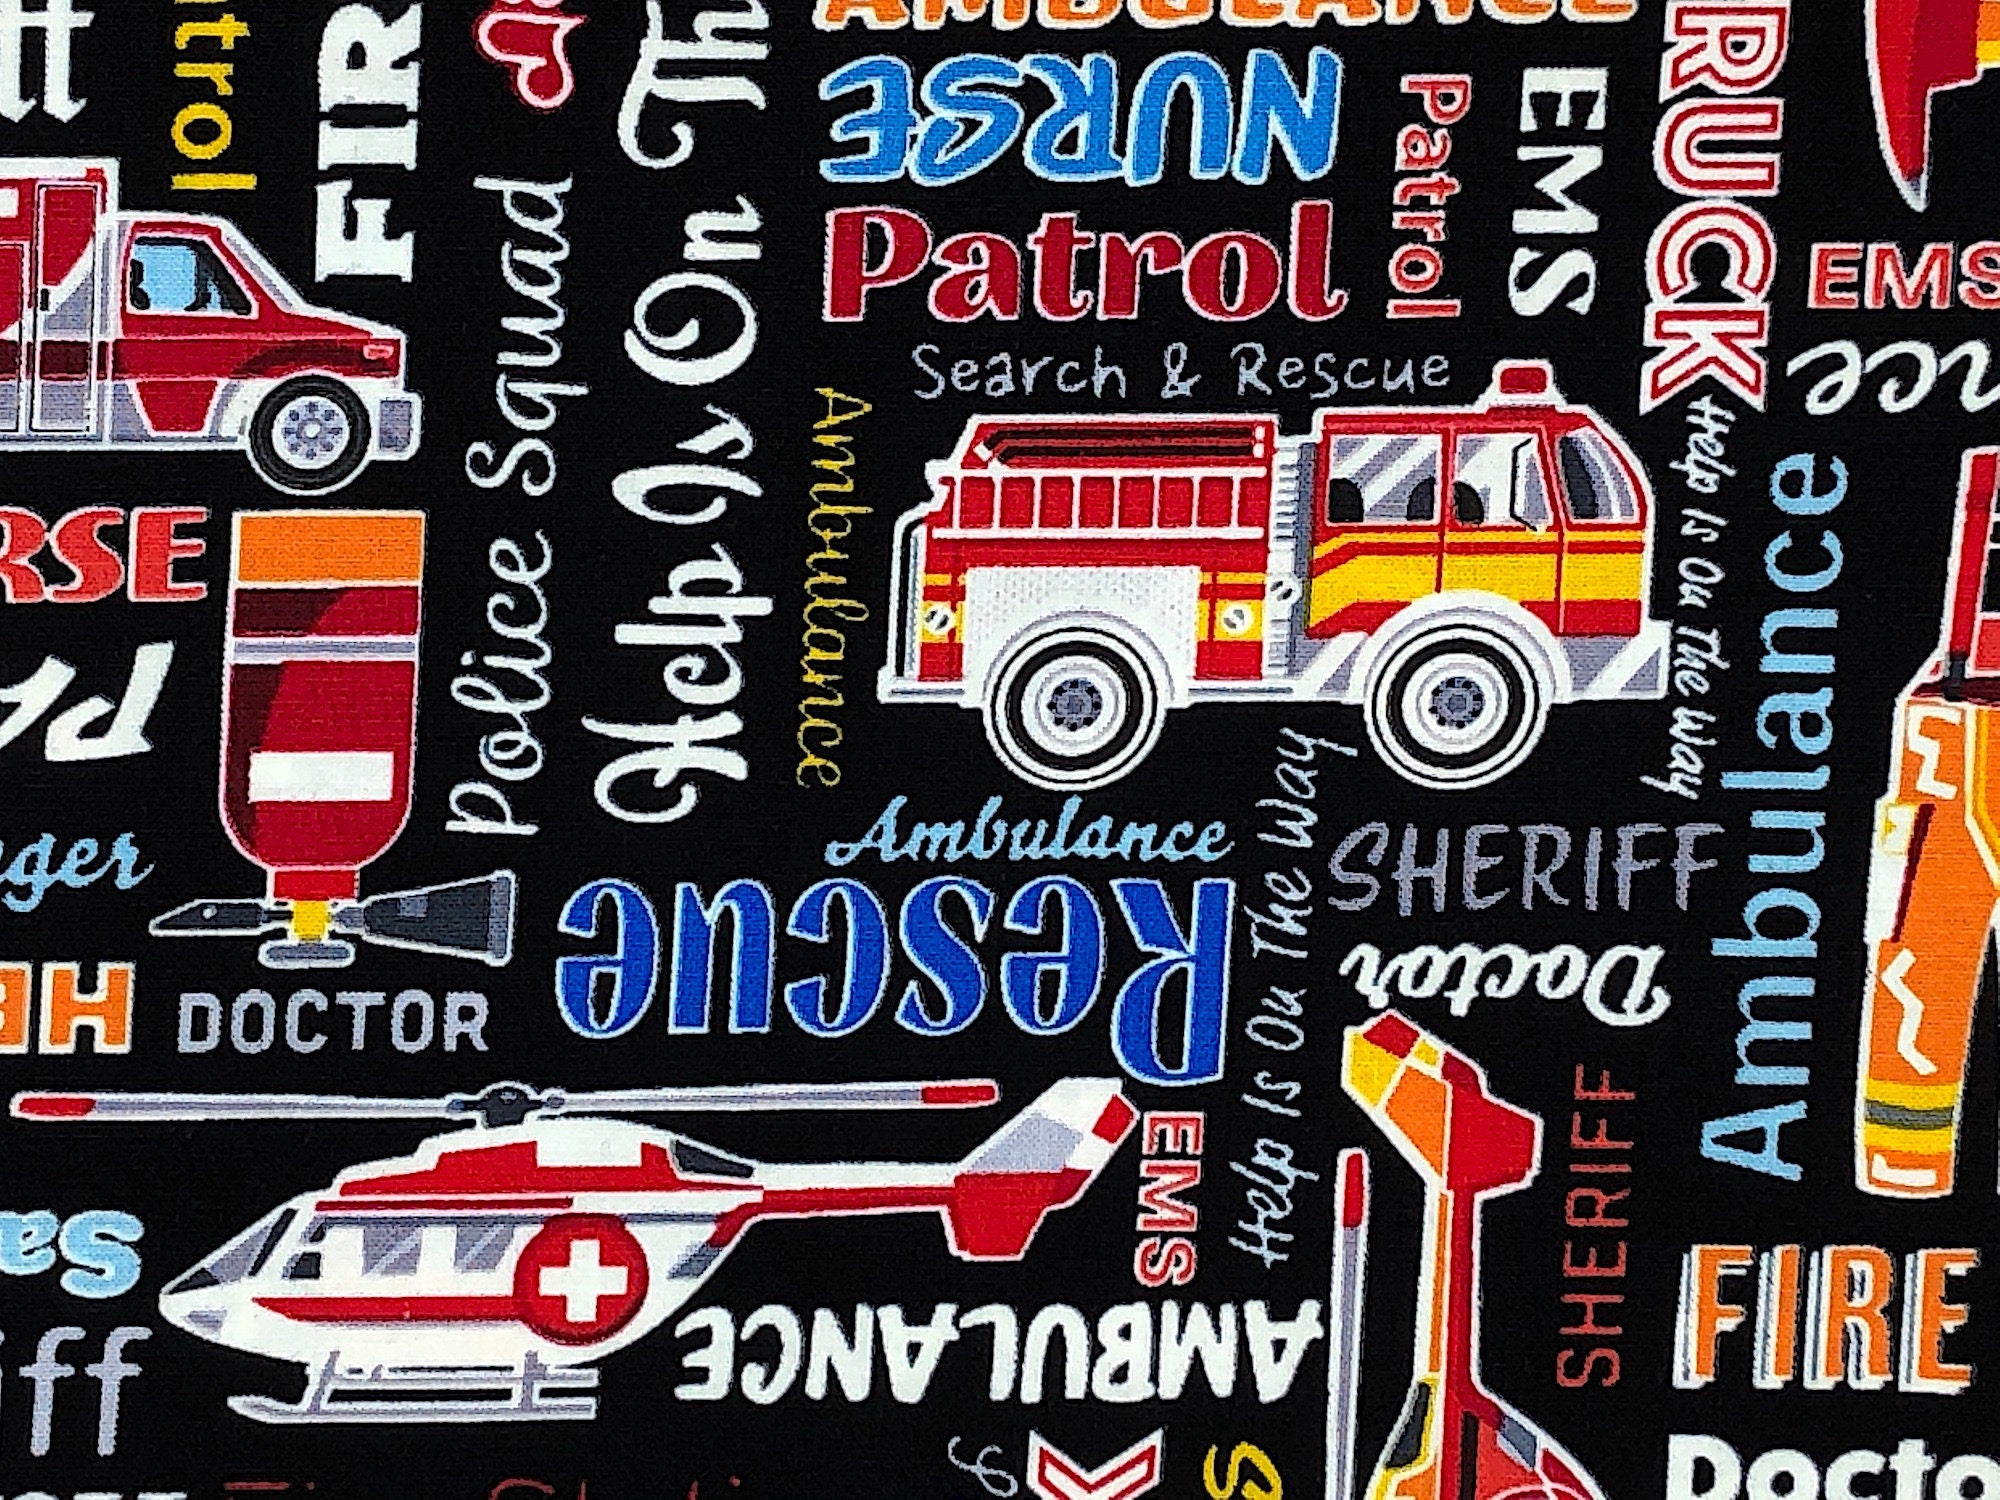 Close up of fire truck and sayings such as rescue, ambulance sheriff, doctor and more.